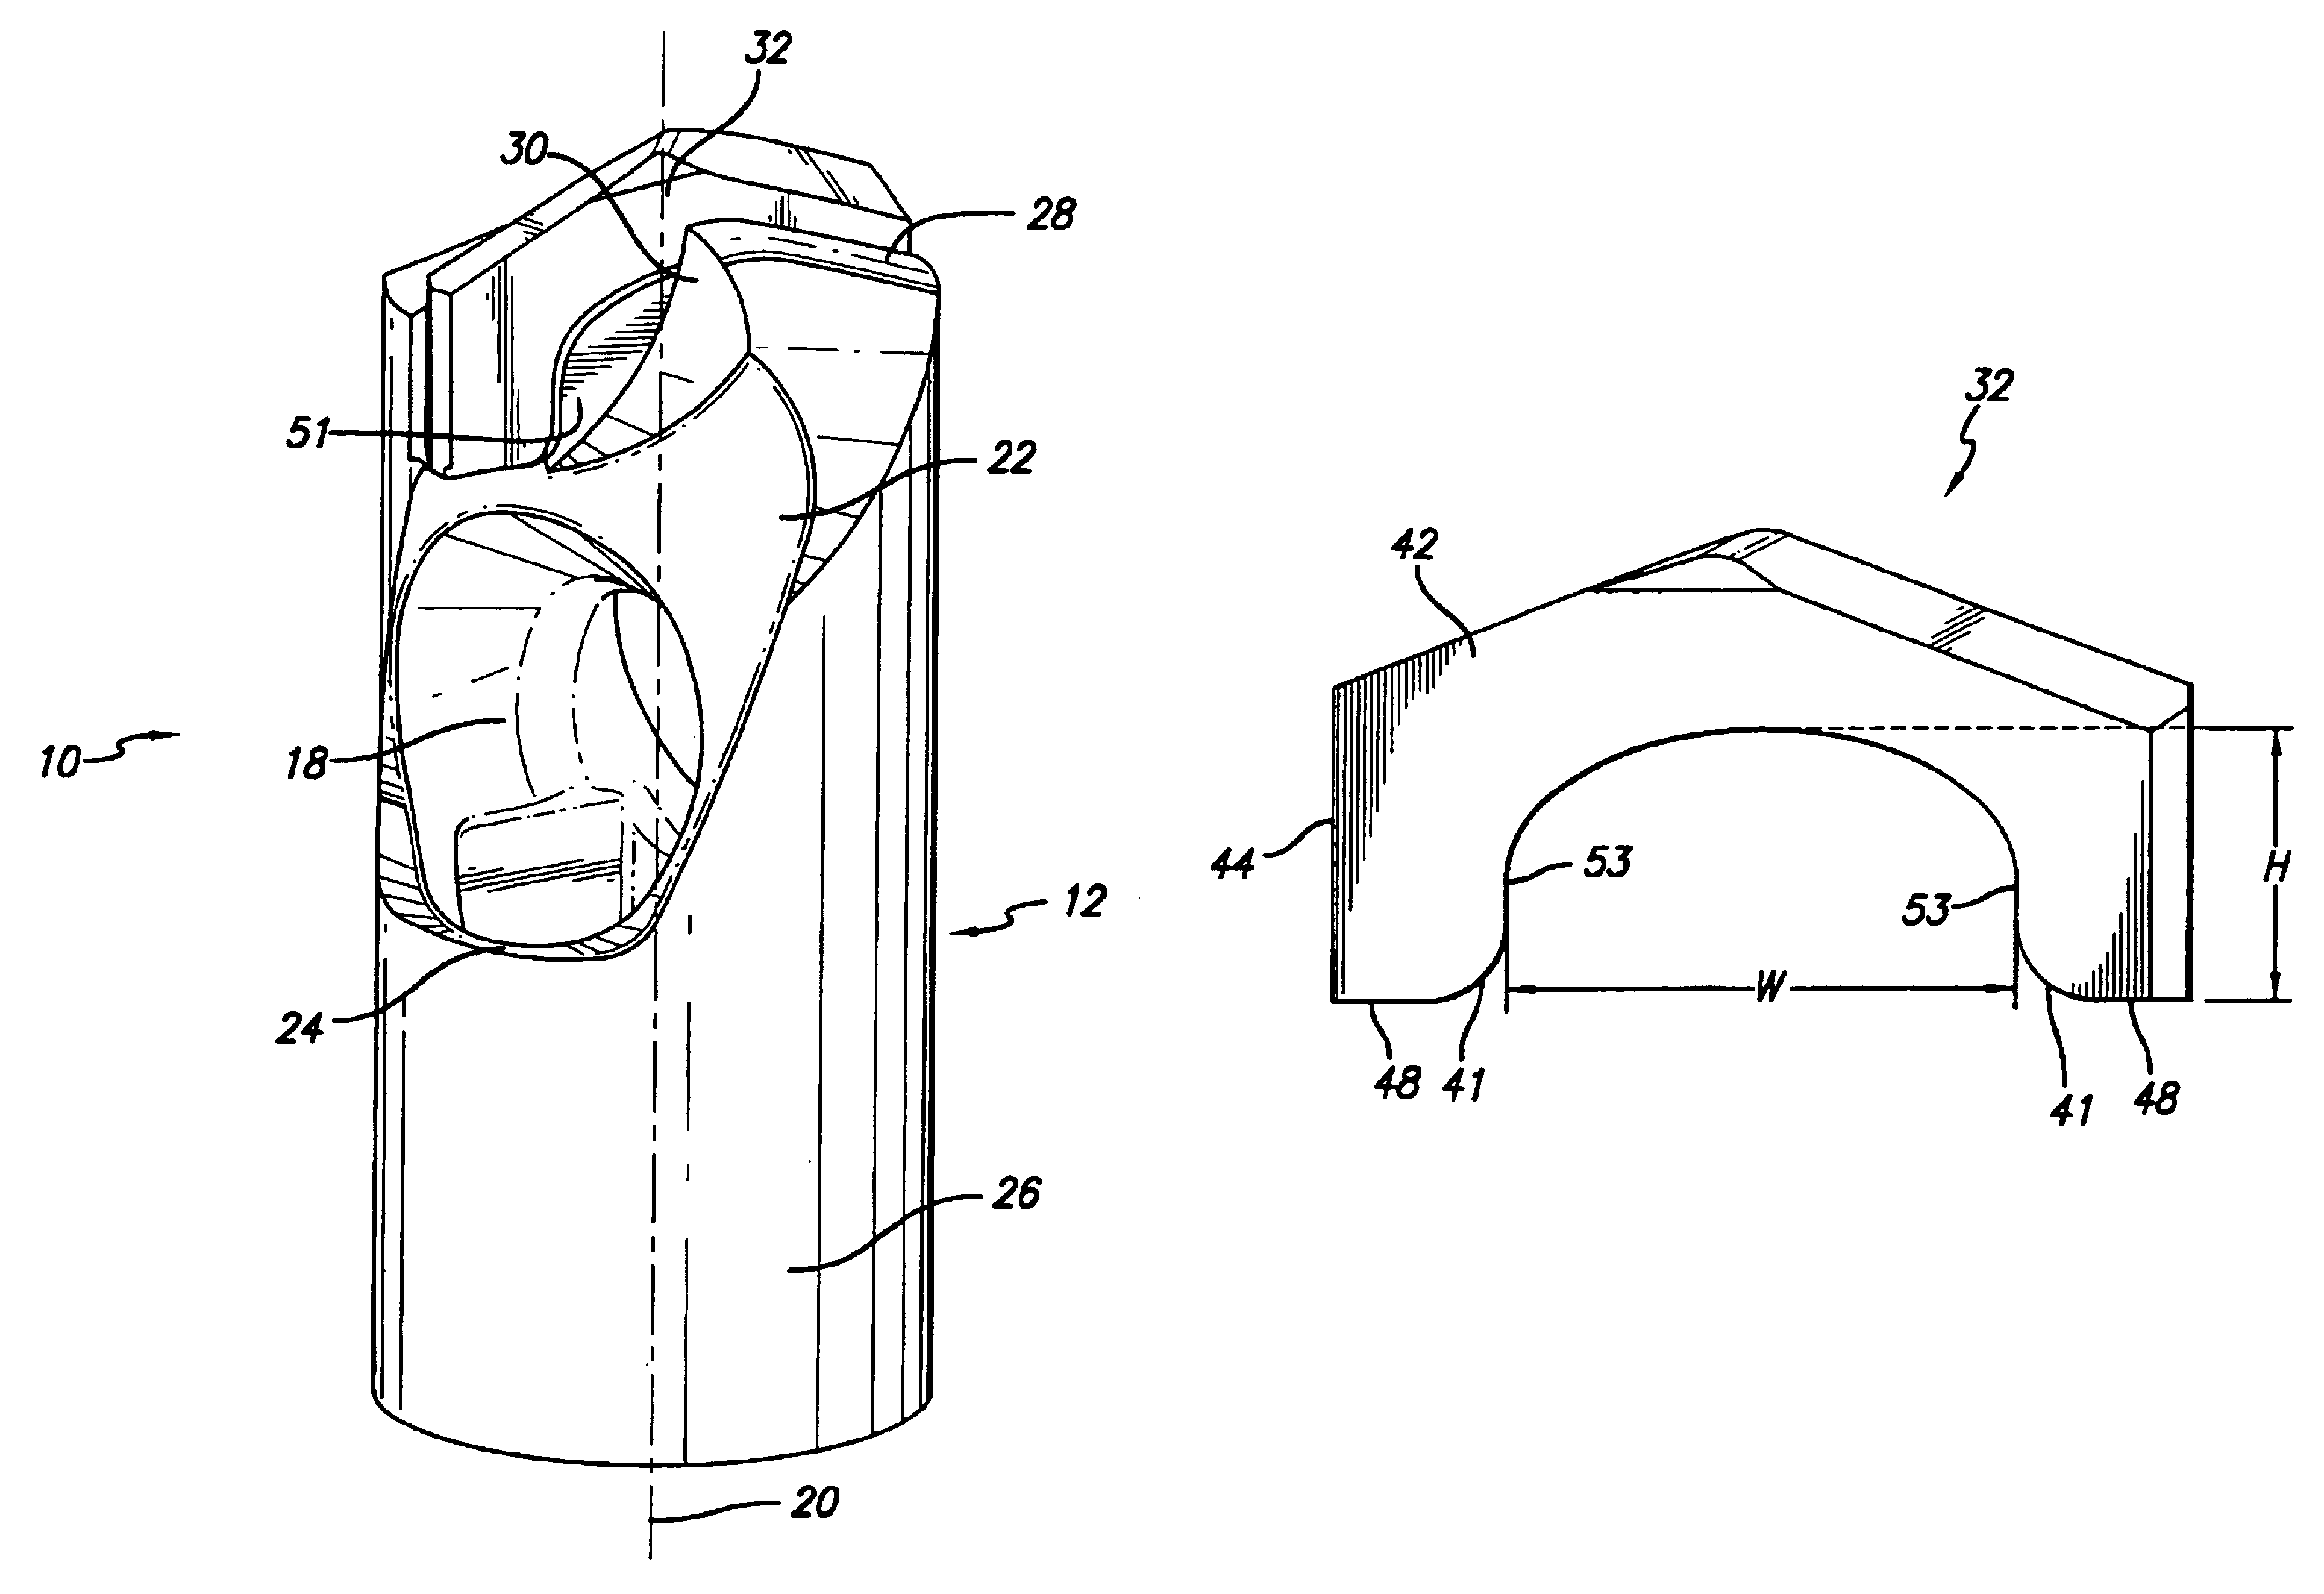 Roof bit and insert assembly